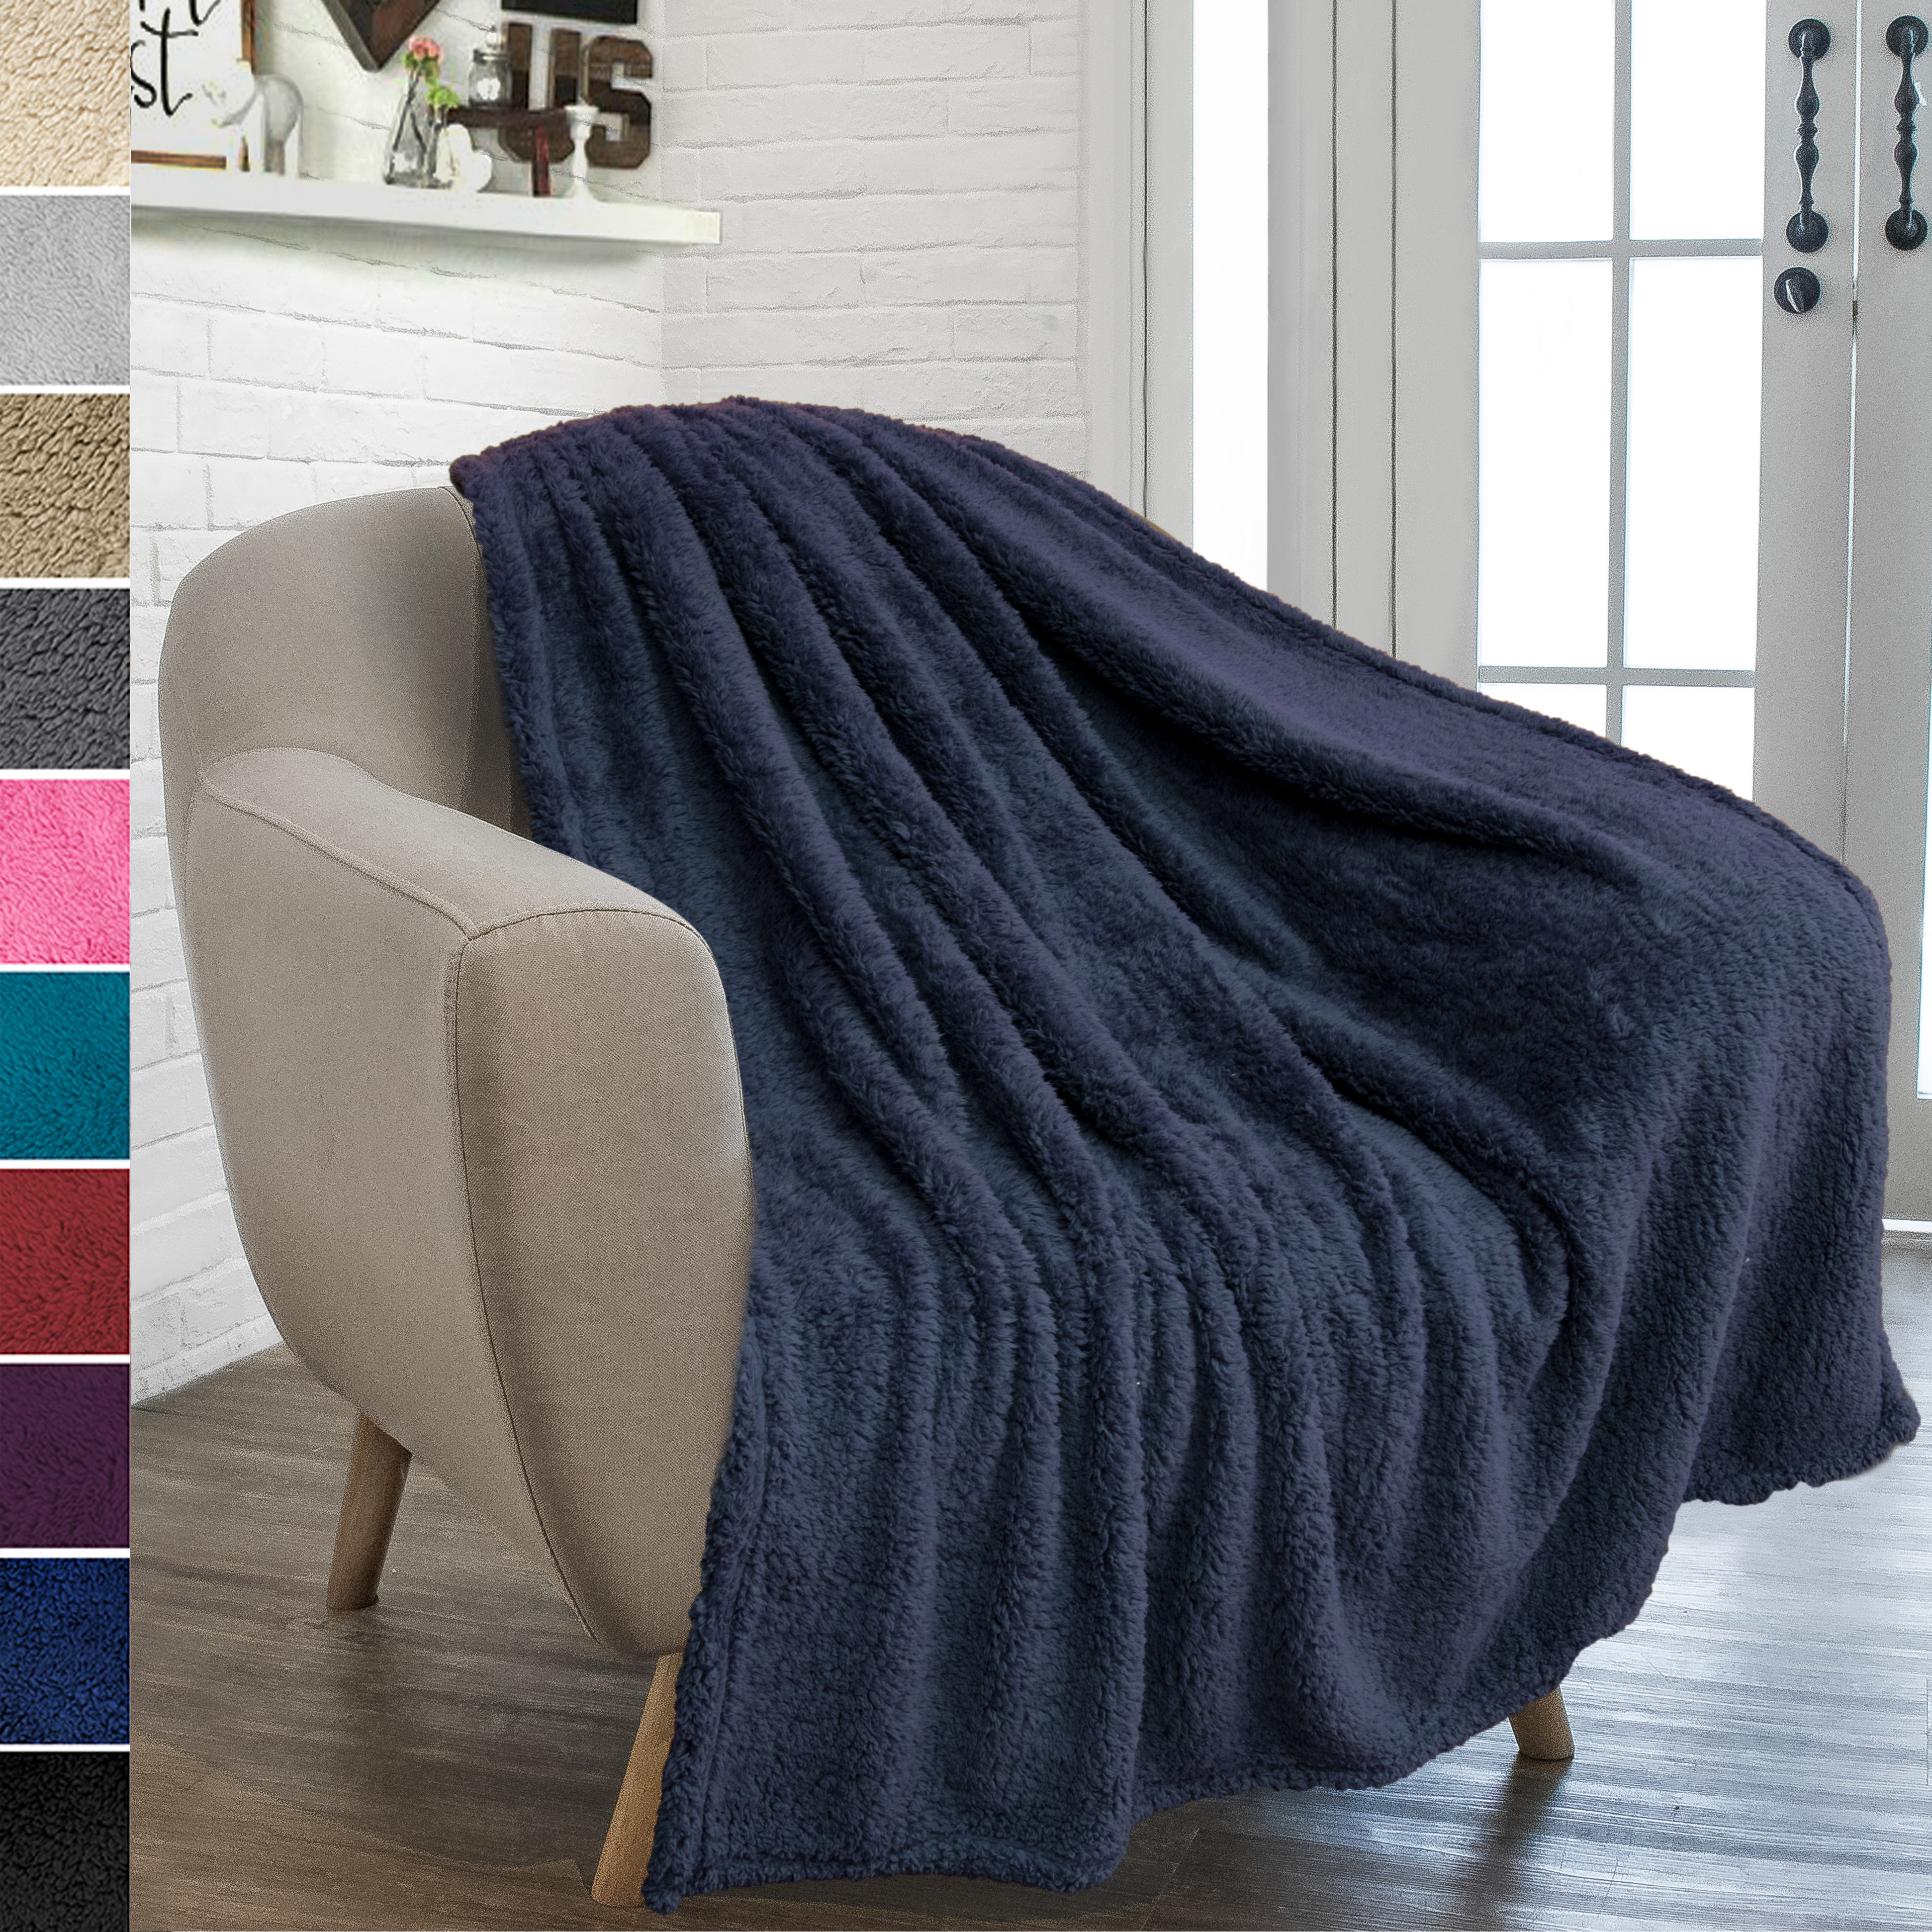 49 x 79 Inches Cozy Reversible Microfiber Blanket for Bed Sofa Couch Shaggy Sherpa Fleece Blanket Ultra Soft Throw Blanket Happy Easter Retro Egg Bowknot Gift Ancient Graphic Fuzzy Warm 